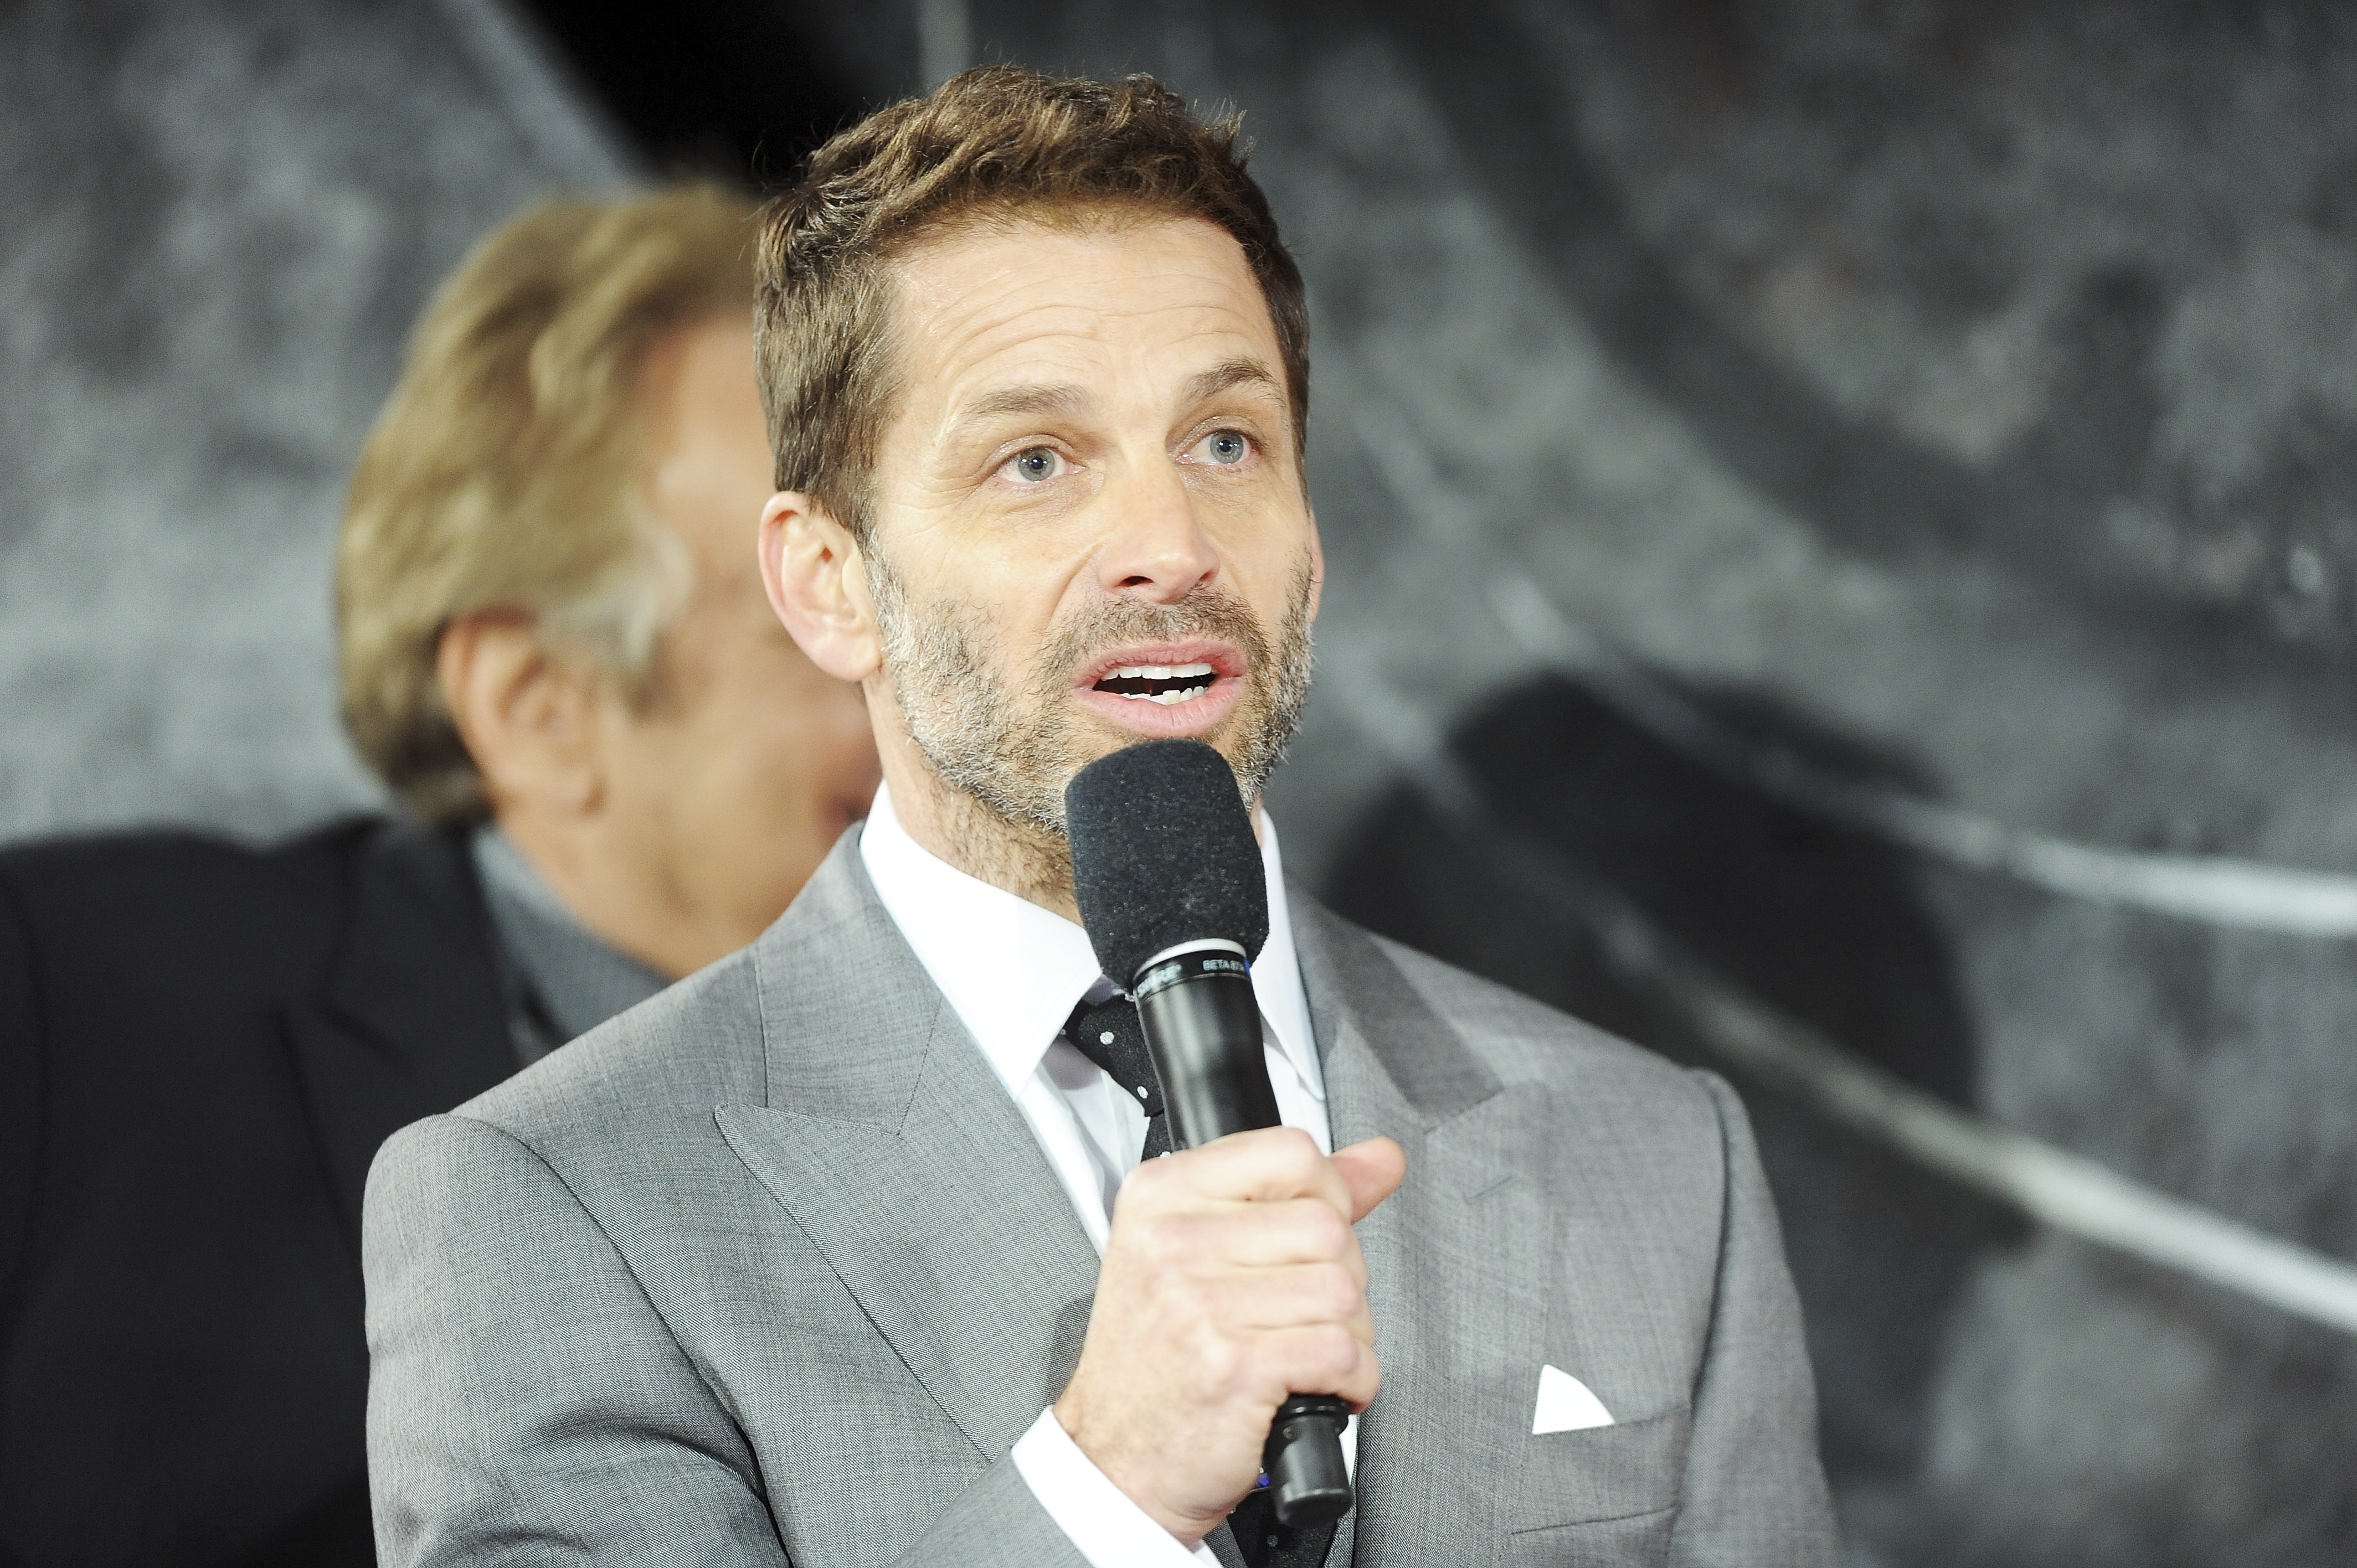 Zack Snyder attends the european premiere for one of his movies, Batman V. Superman: Dawn of Justice